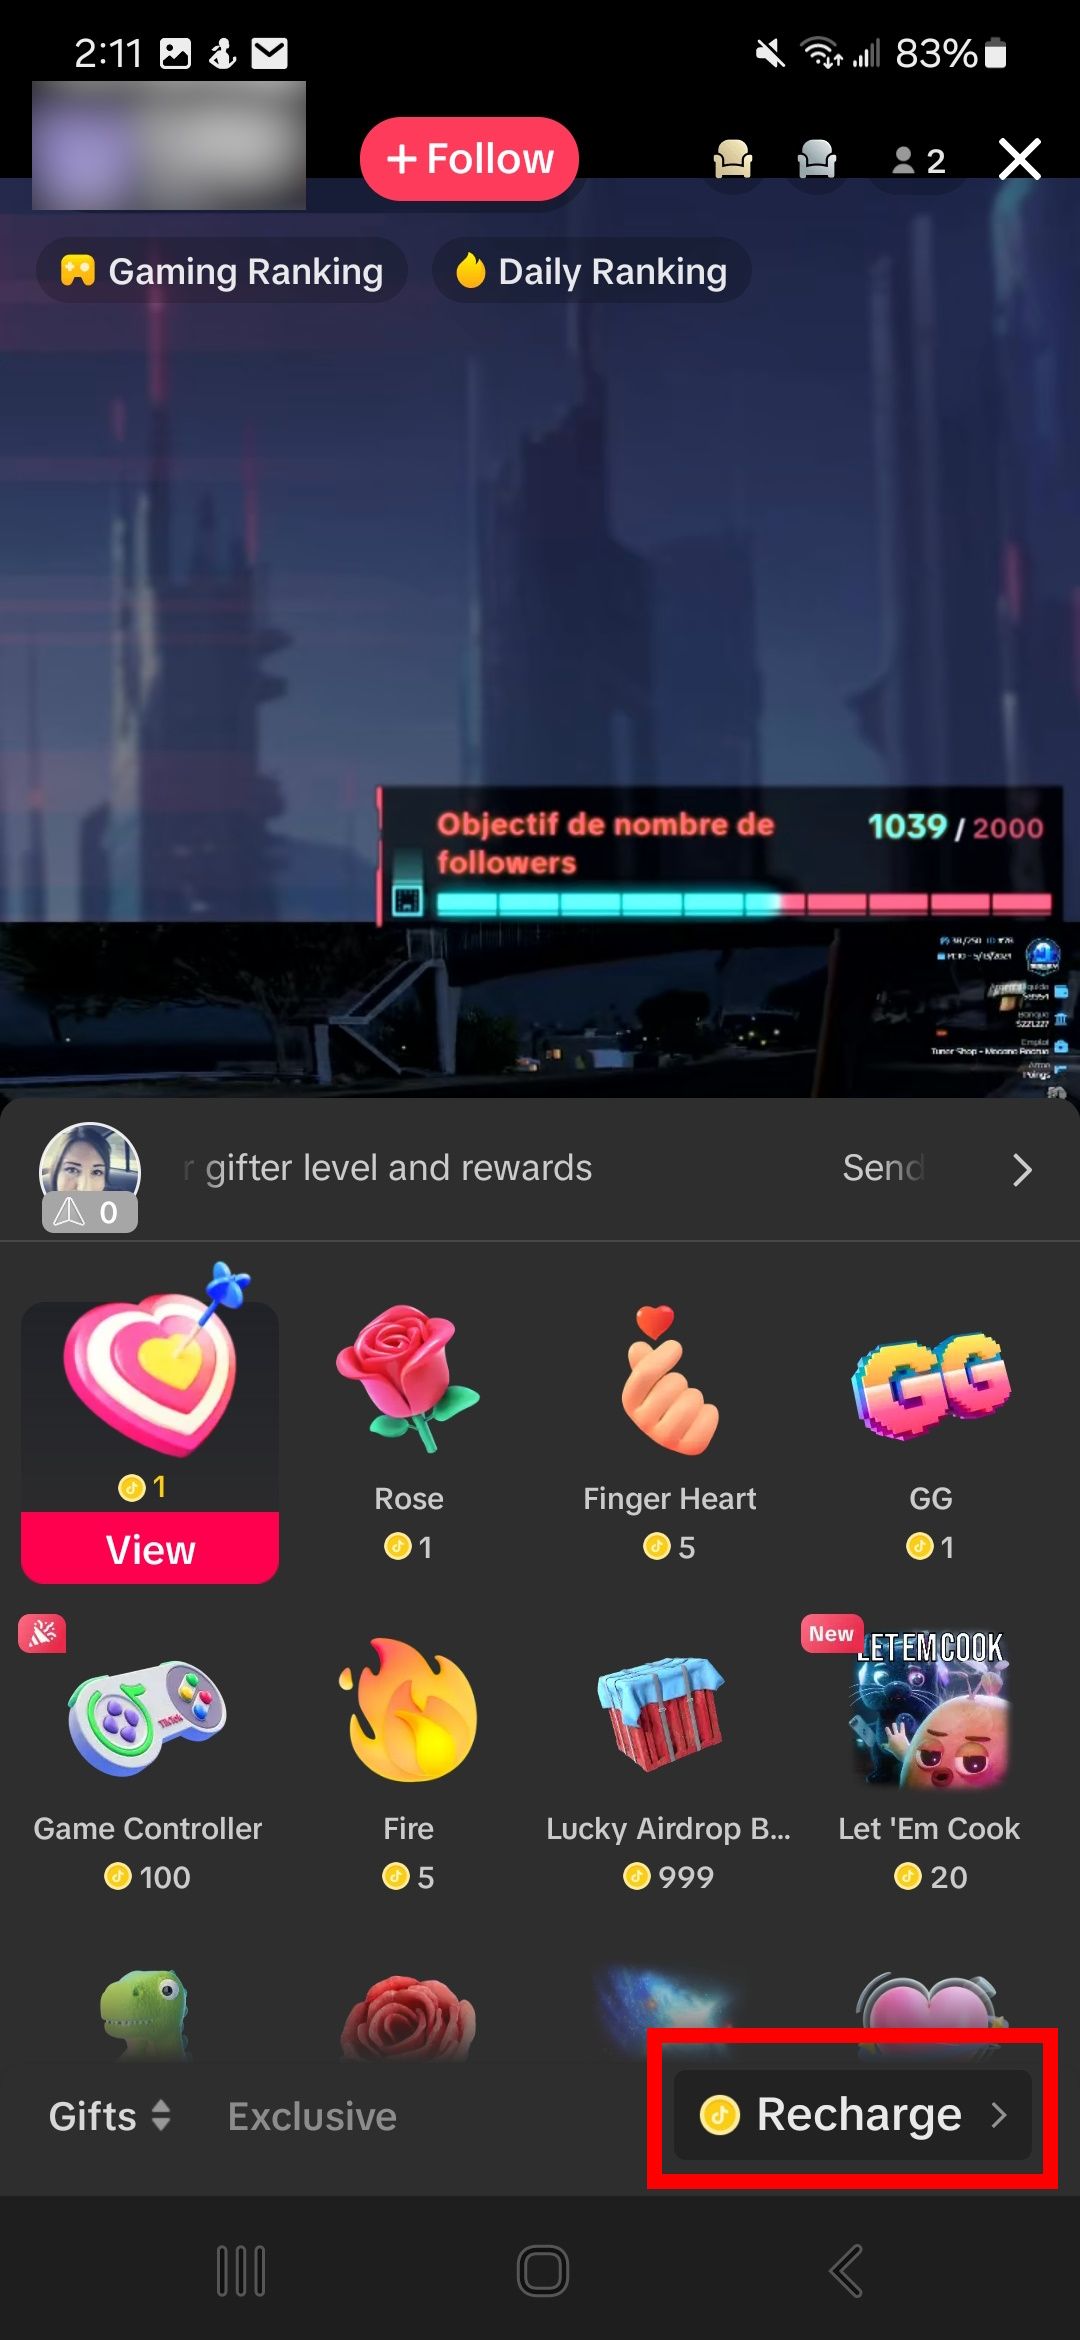 red rectangle outline over recharge option in gift menu during a tiktok livestream